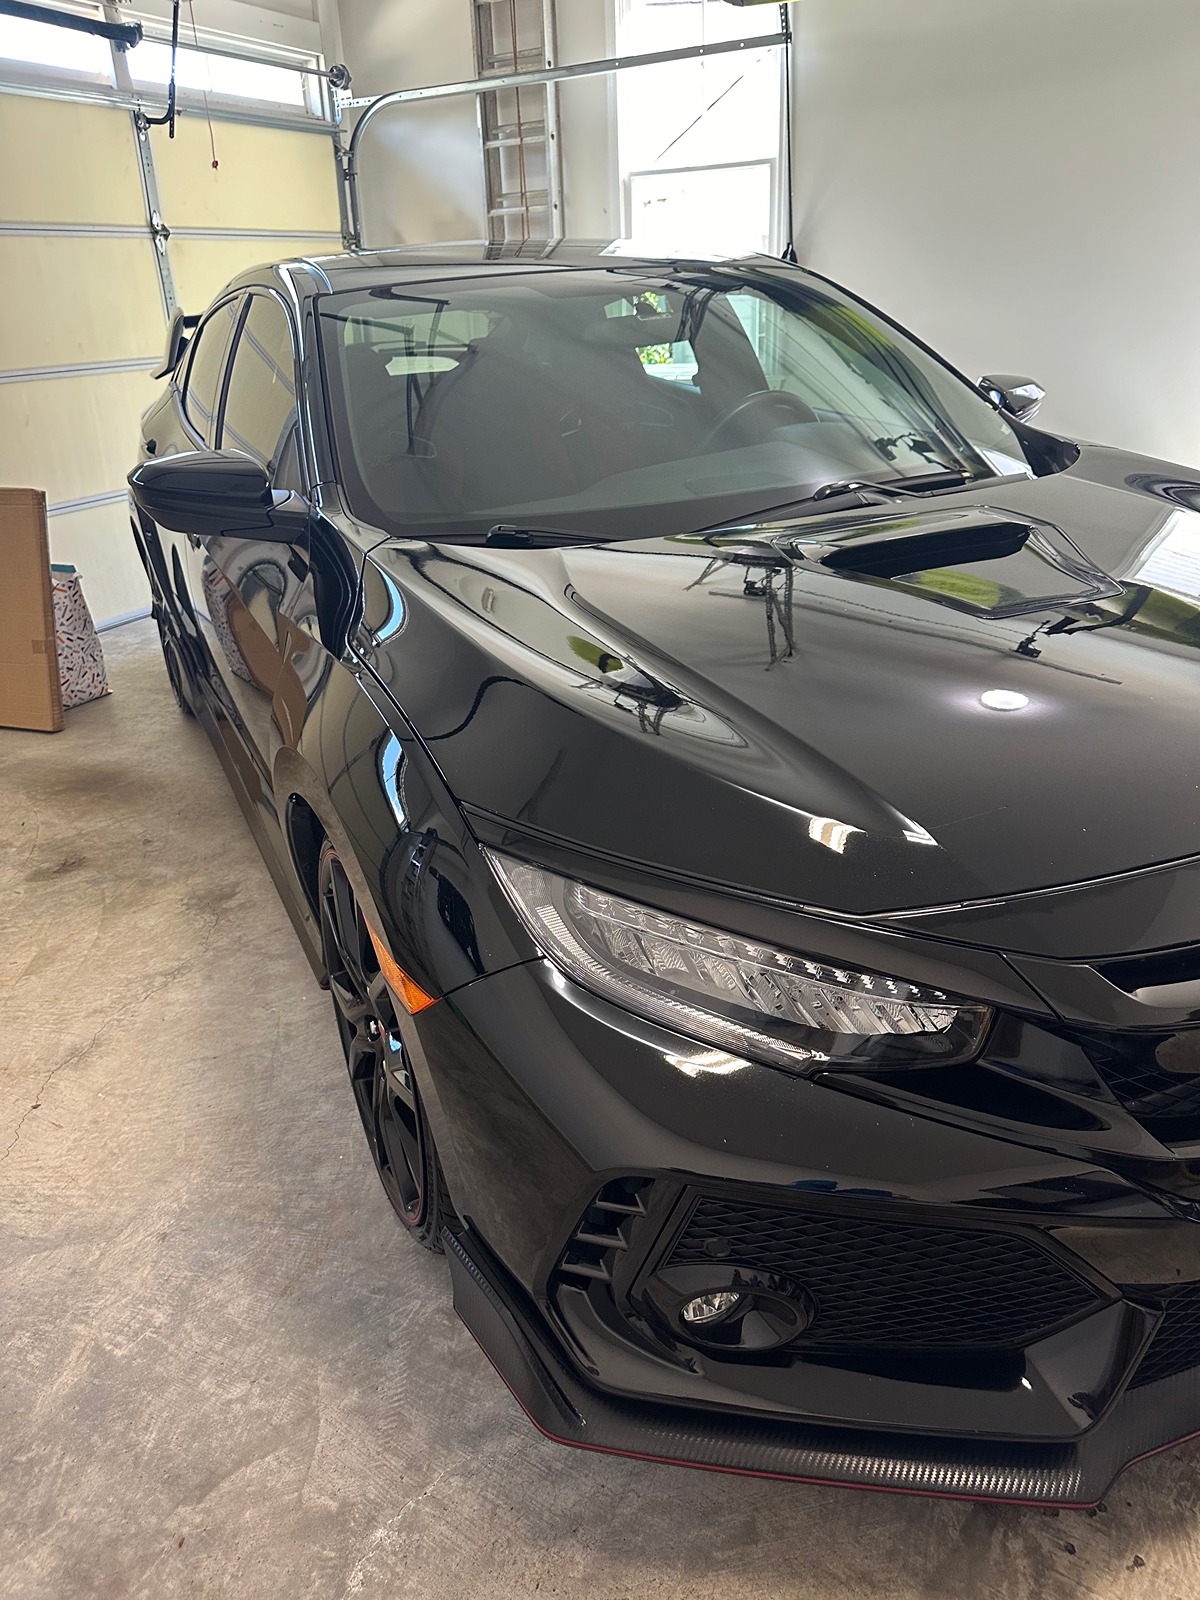 Honda Civic 10th gen Sold. 2019 Civic Type R for sale IMG_8216